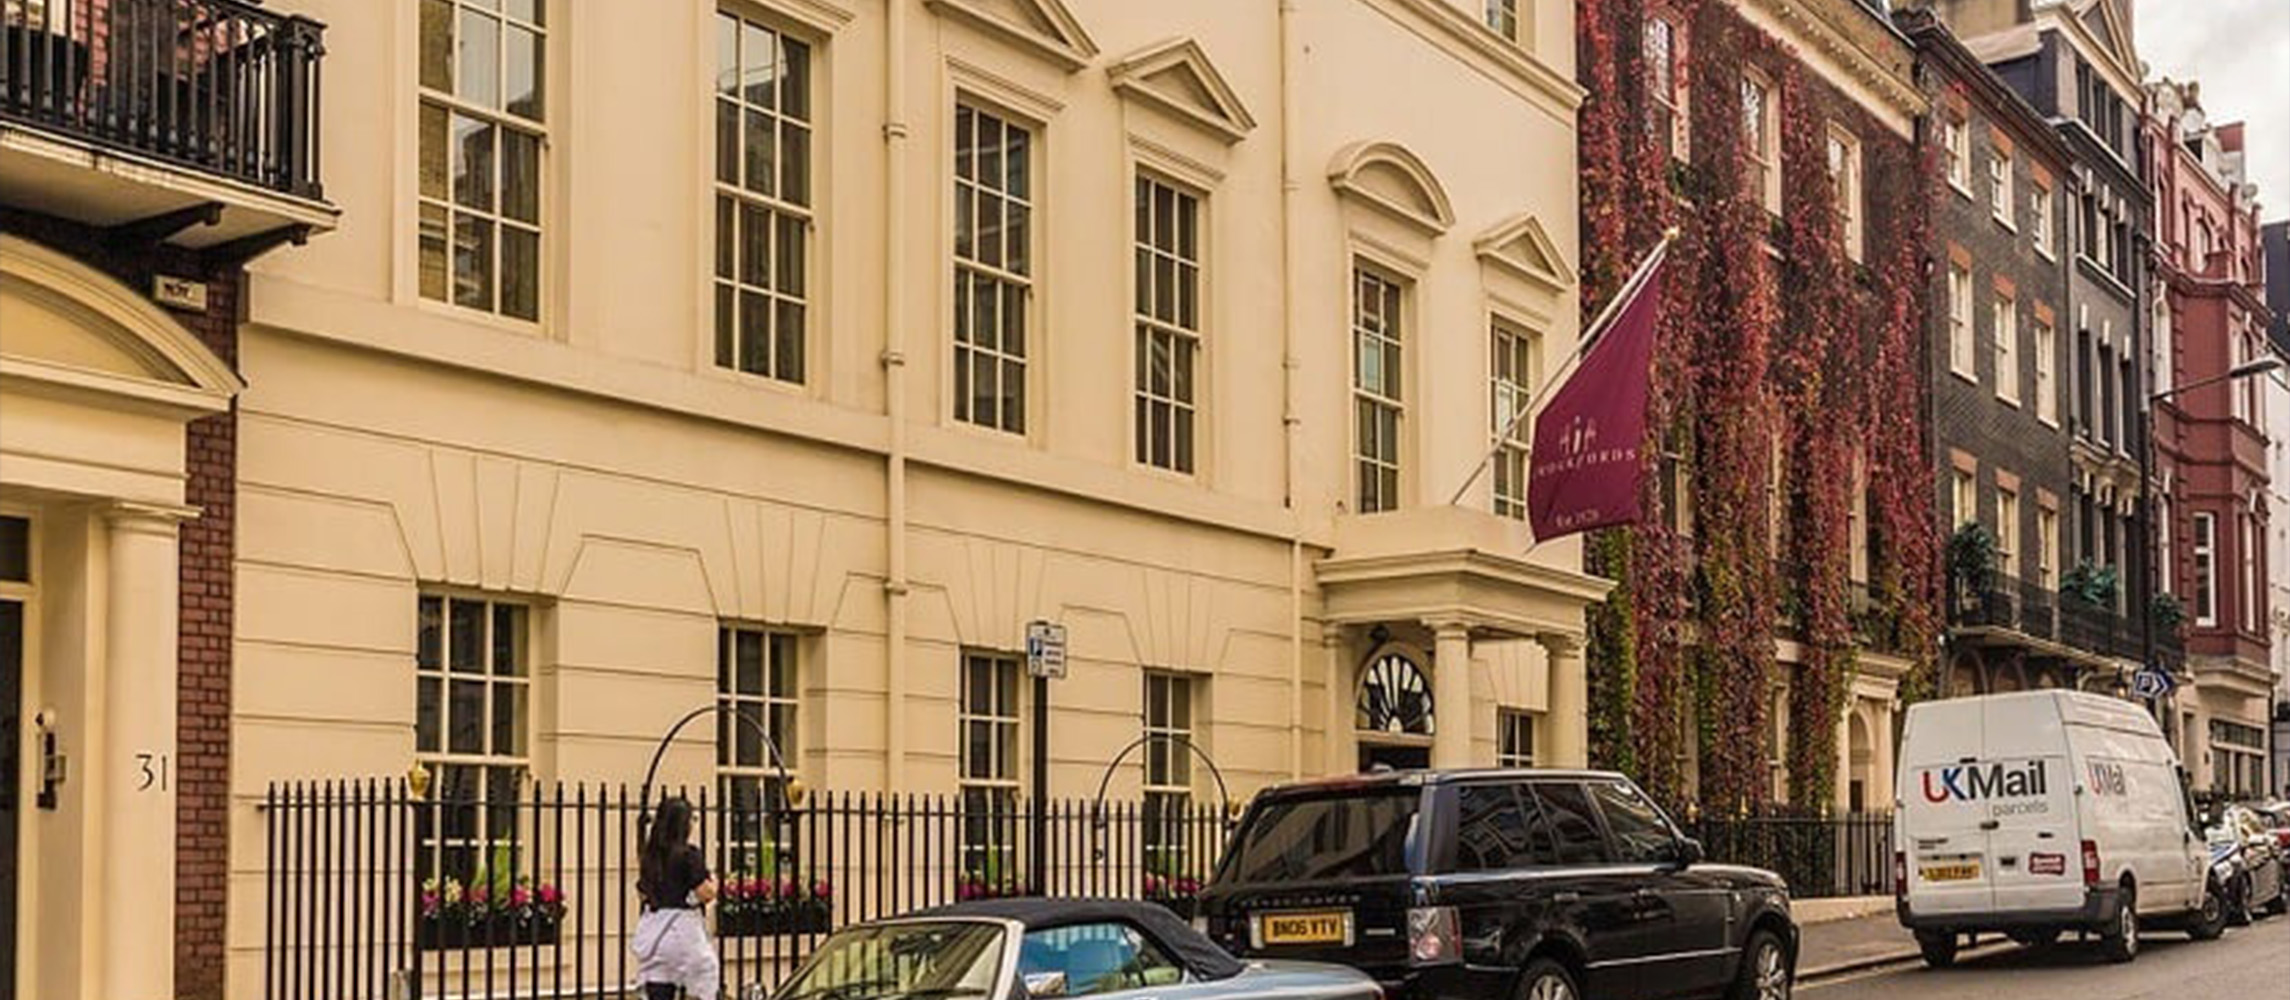 Crockfords Casino was founded in the centre of Mayfair in 1828 by a working-class fishmonger